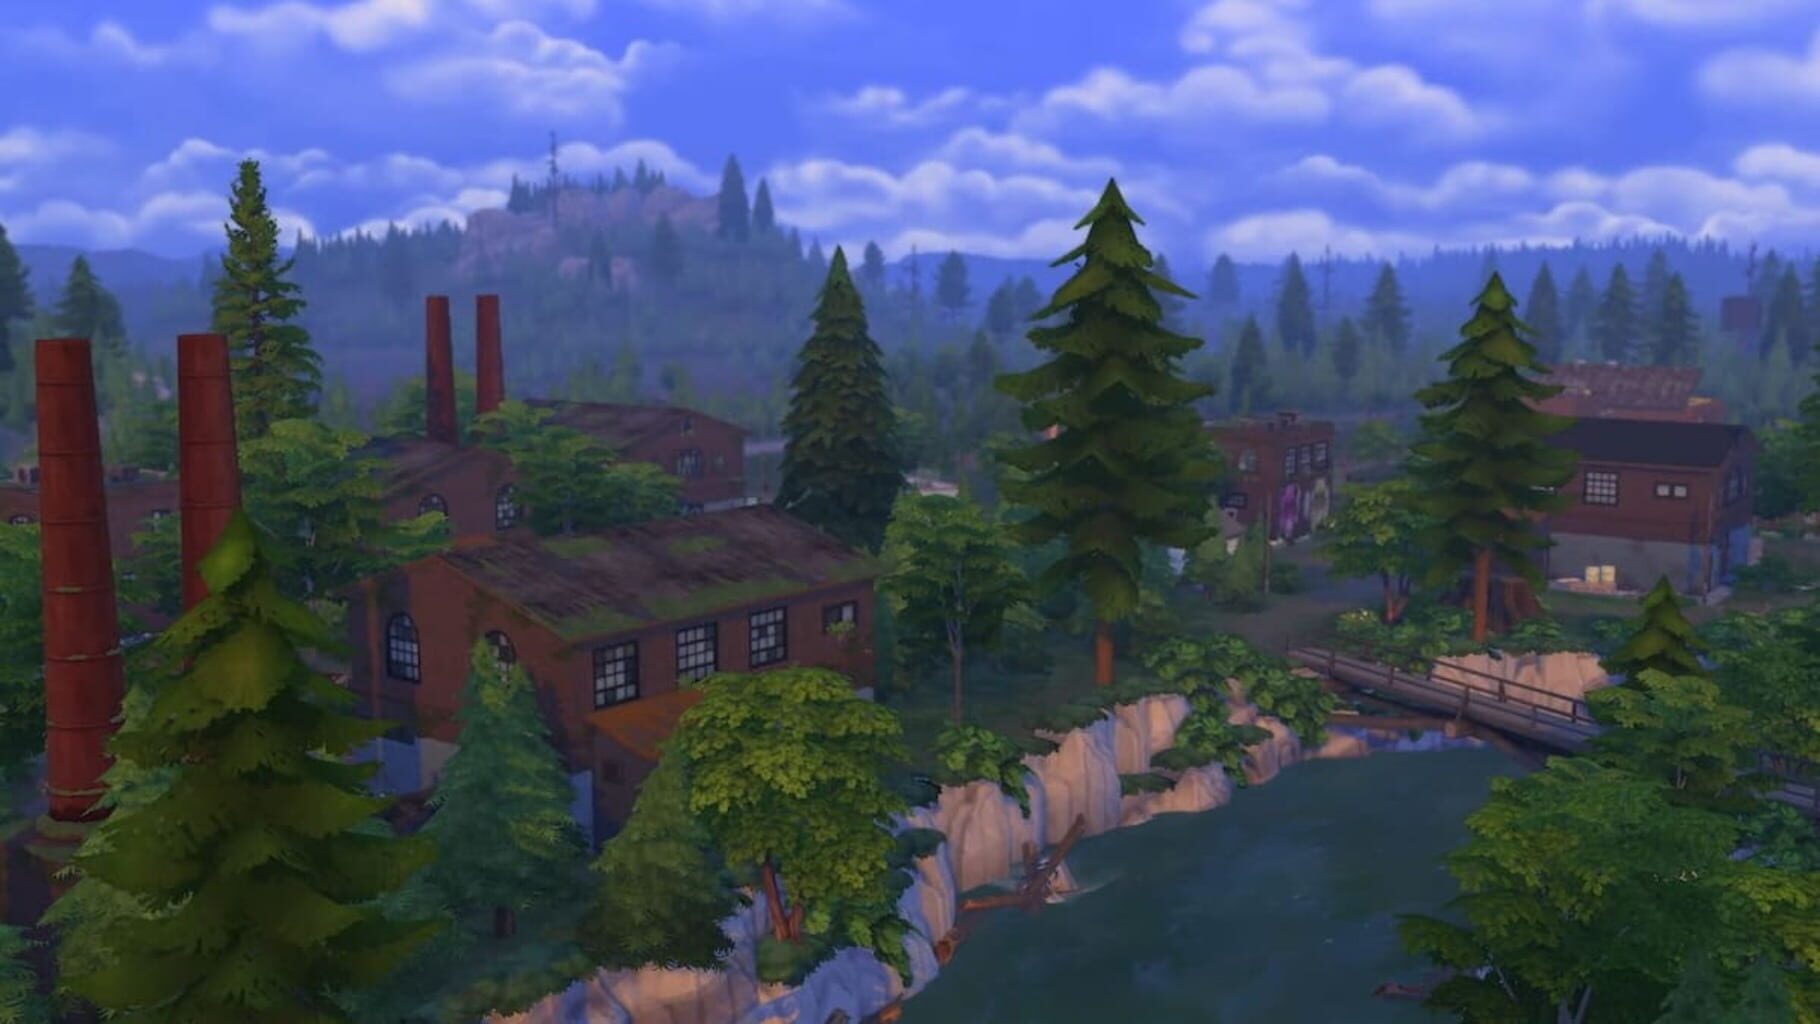 The Sims 4: Werewolves Image